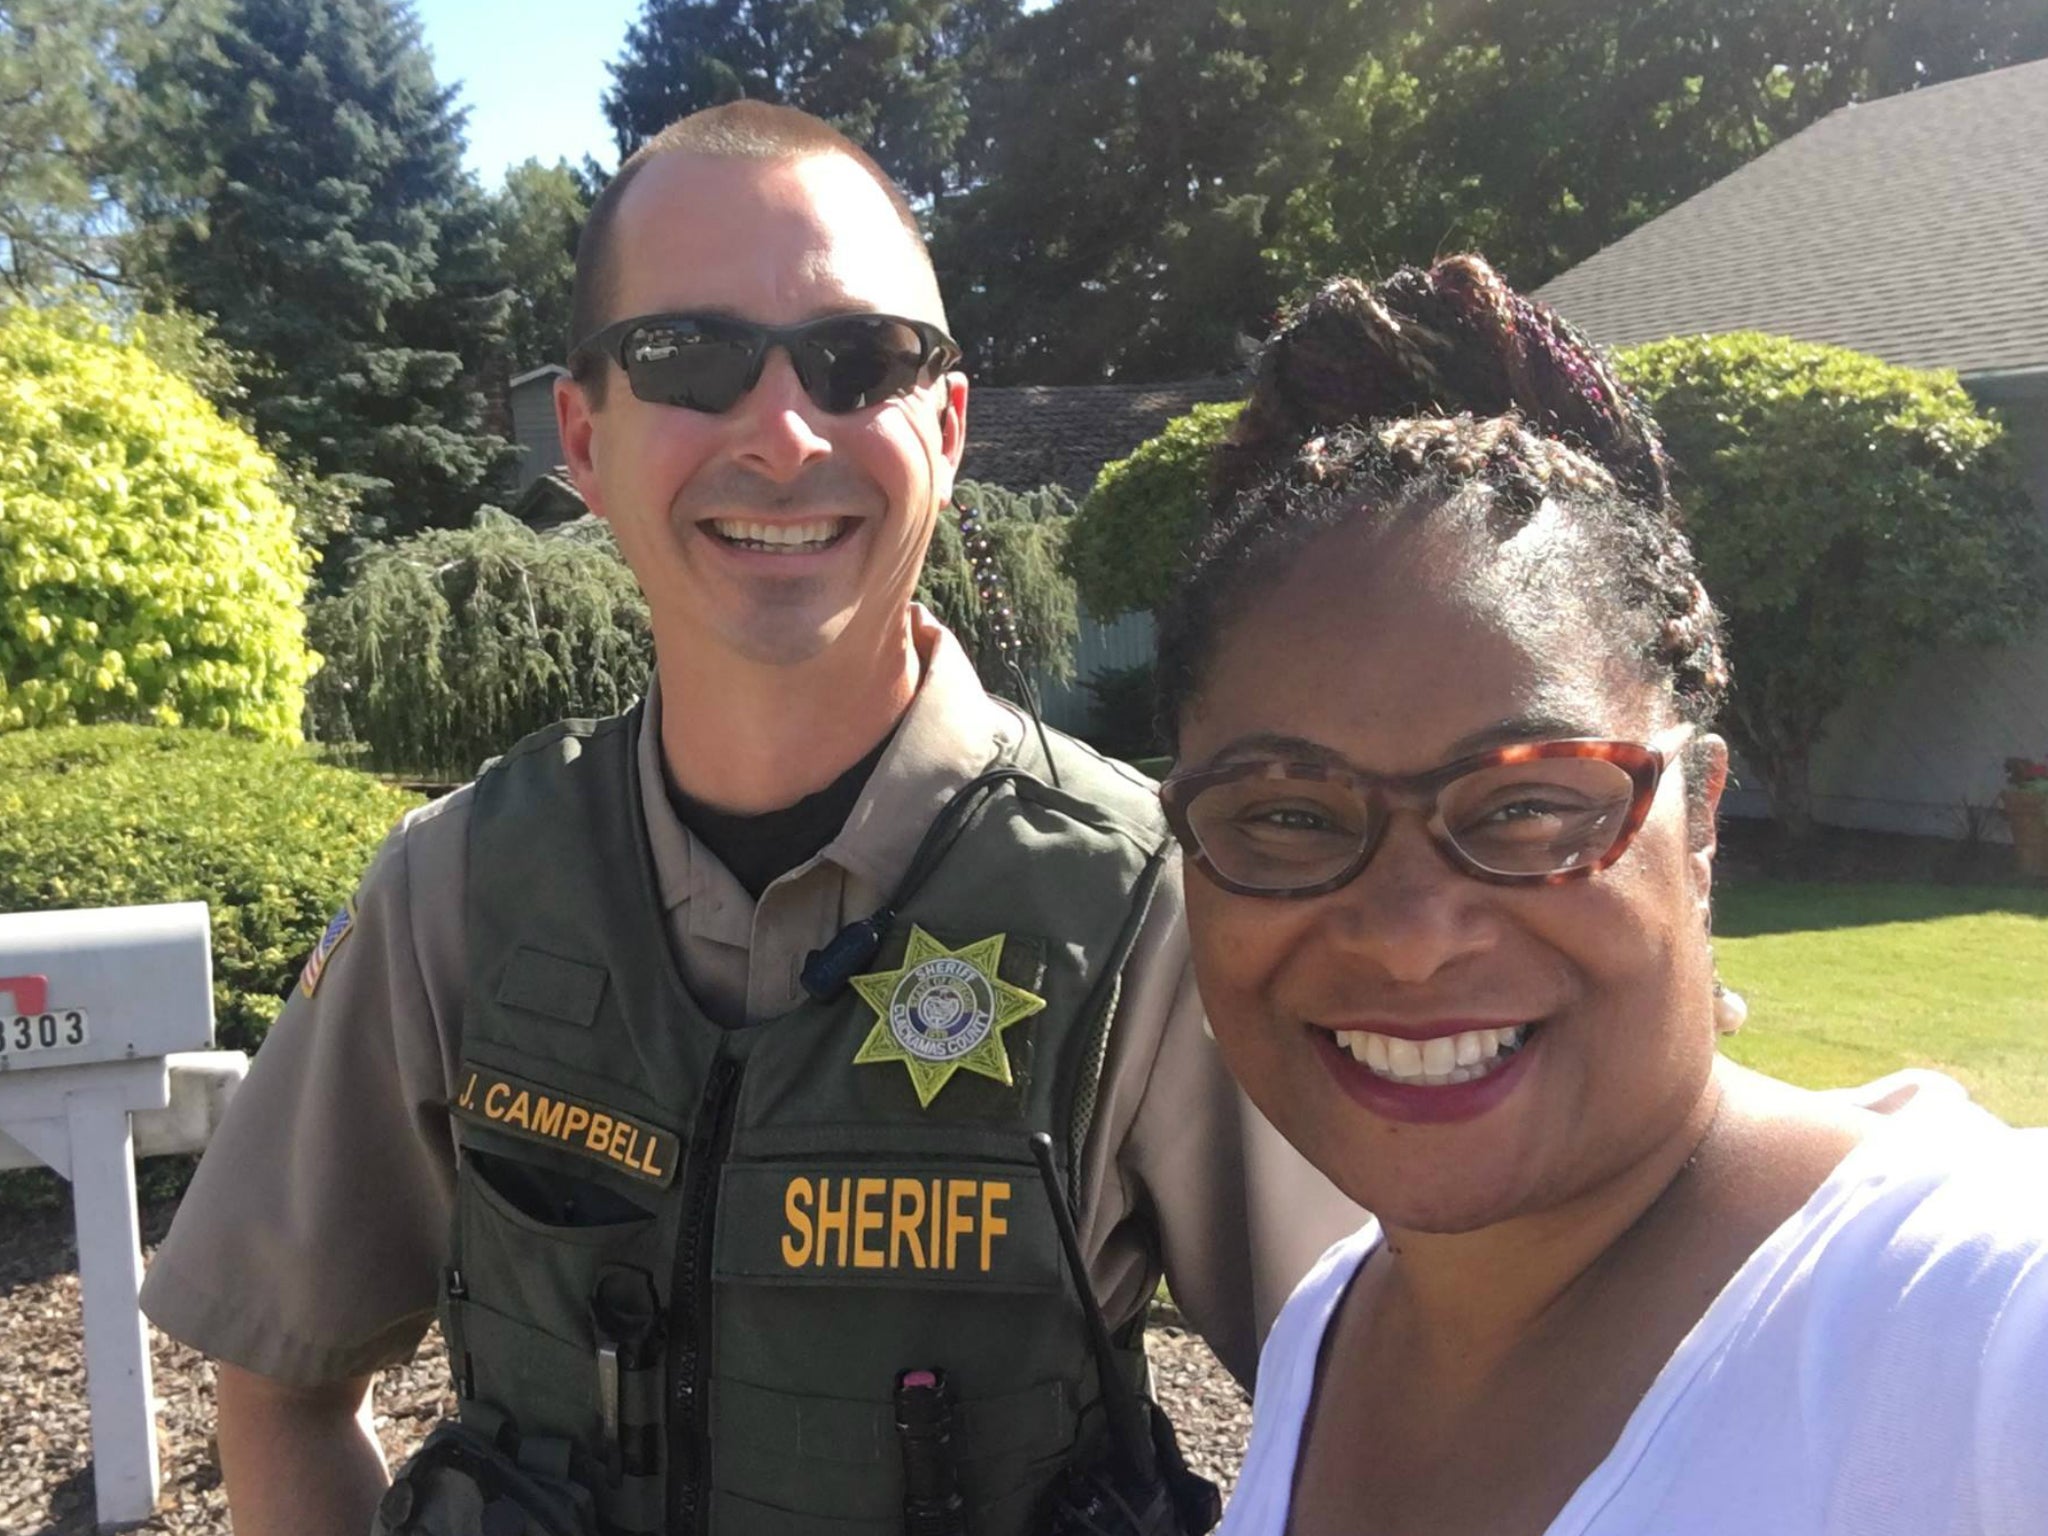 Oregon State Representative Janelle Bynum takes a picture with Officer Campbell of the Clackamas County Sheriff's office after a voter called police to report the candidate for campaigning door-to-door